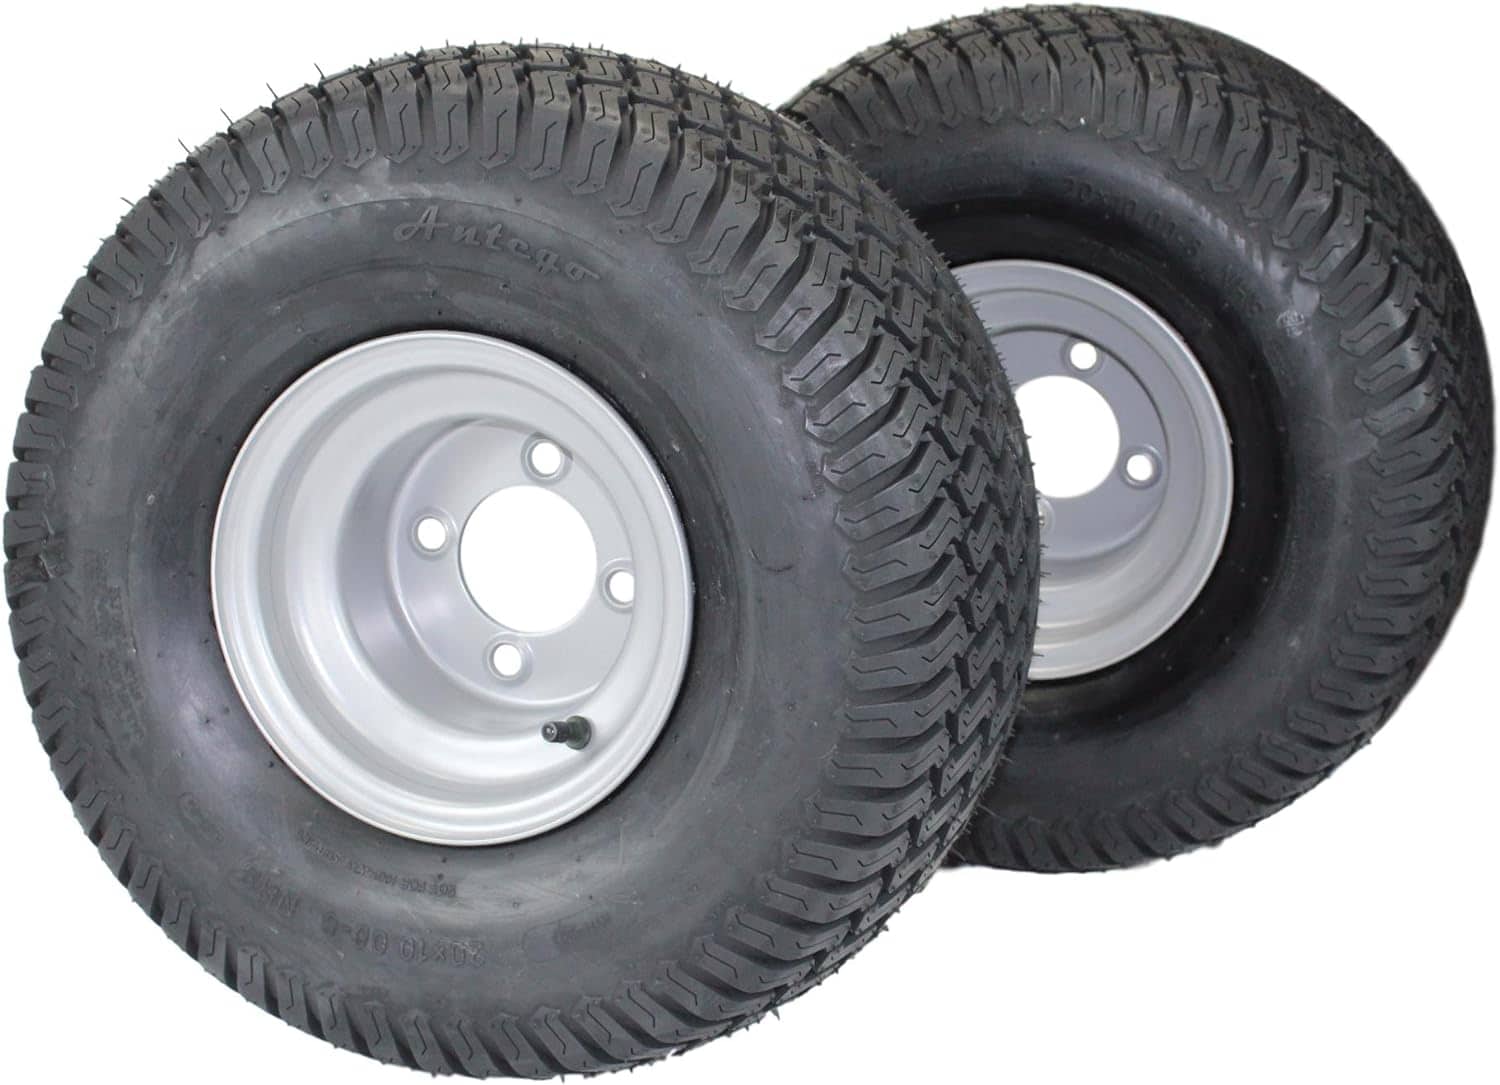 Antego Tires and Wheels ATW 003